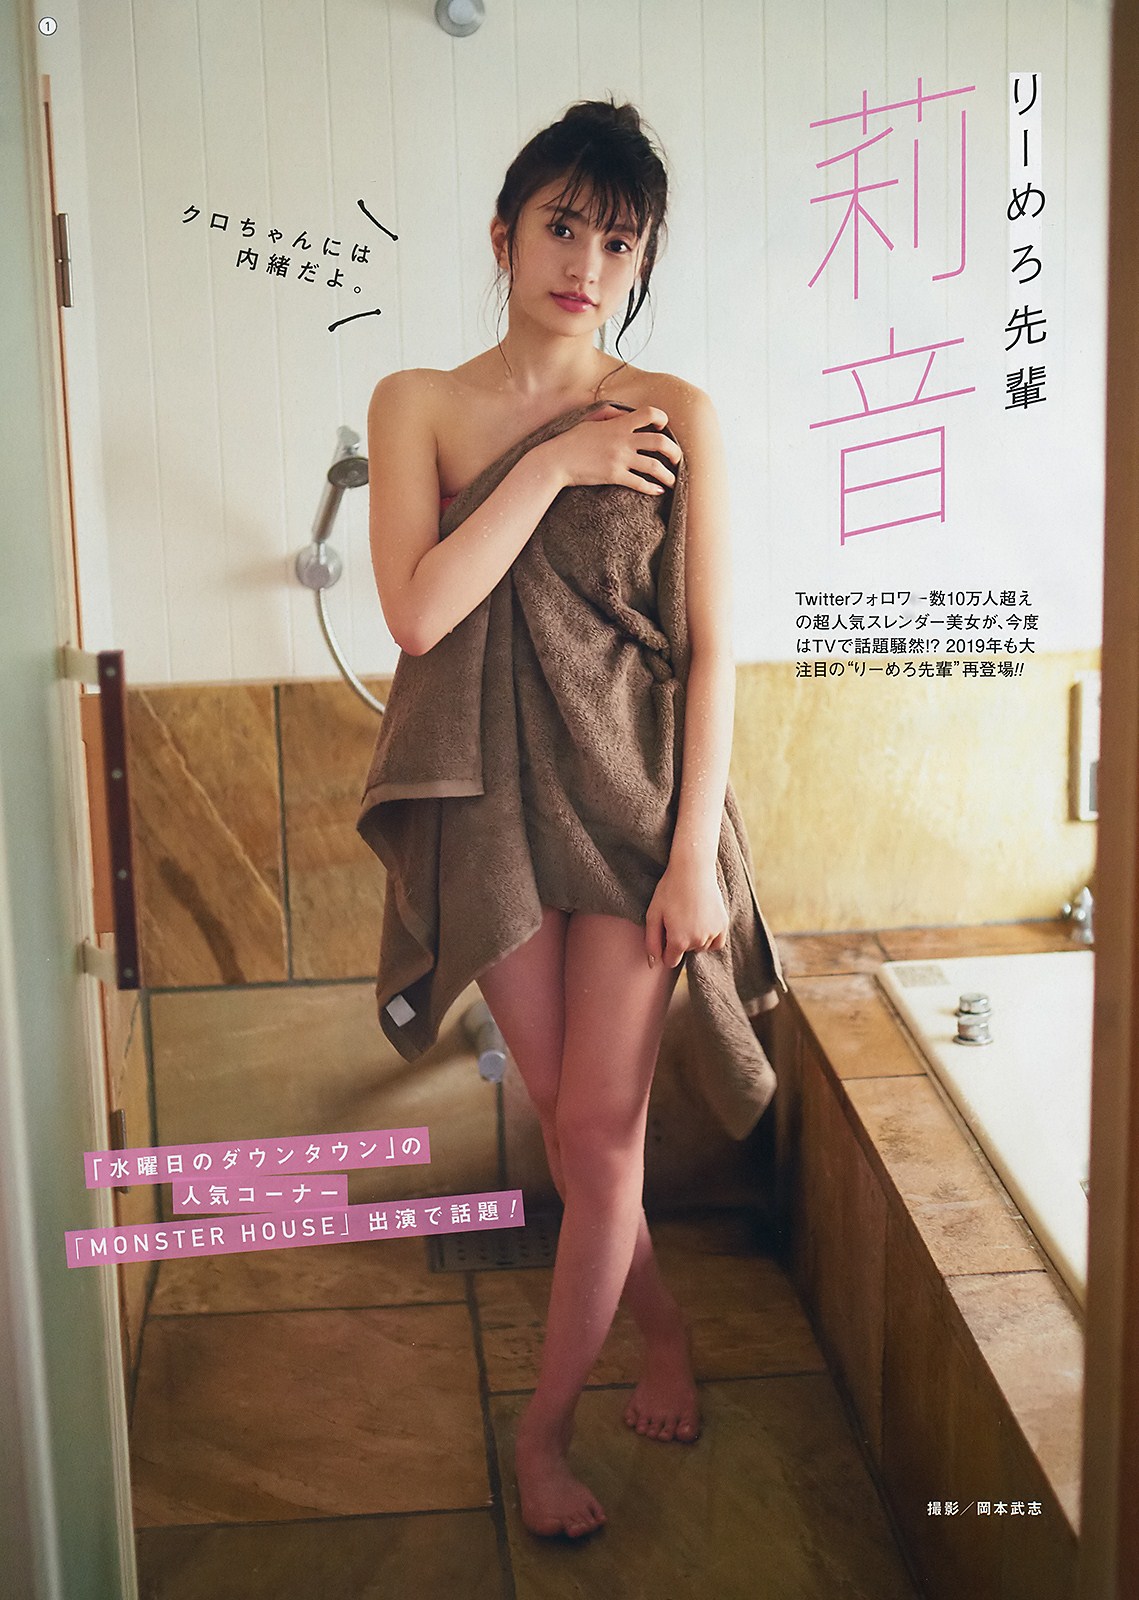 Rion 莉音, Young Gangan 2019 No.02 (ヤングガンガン 2019年2號) - 貼圖 - 清涼寫真 -